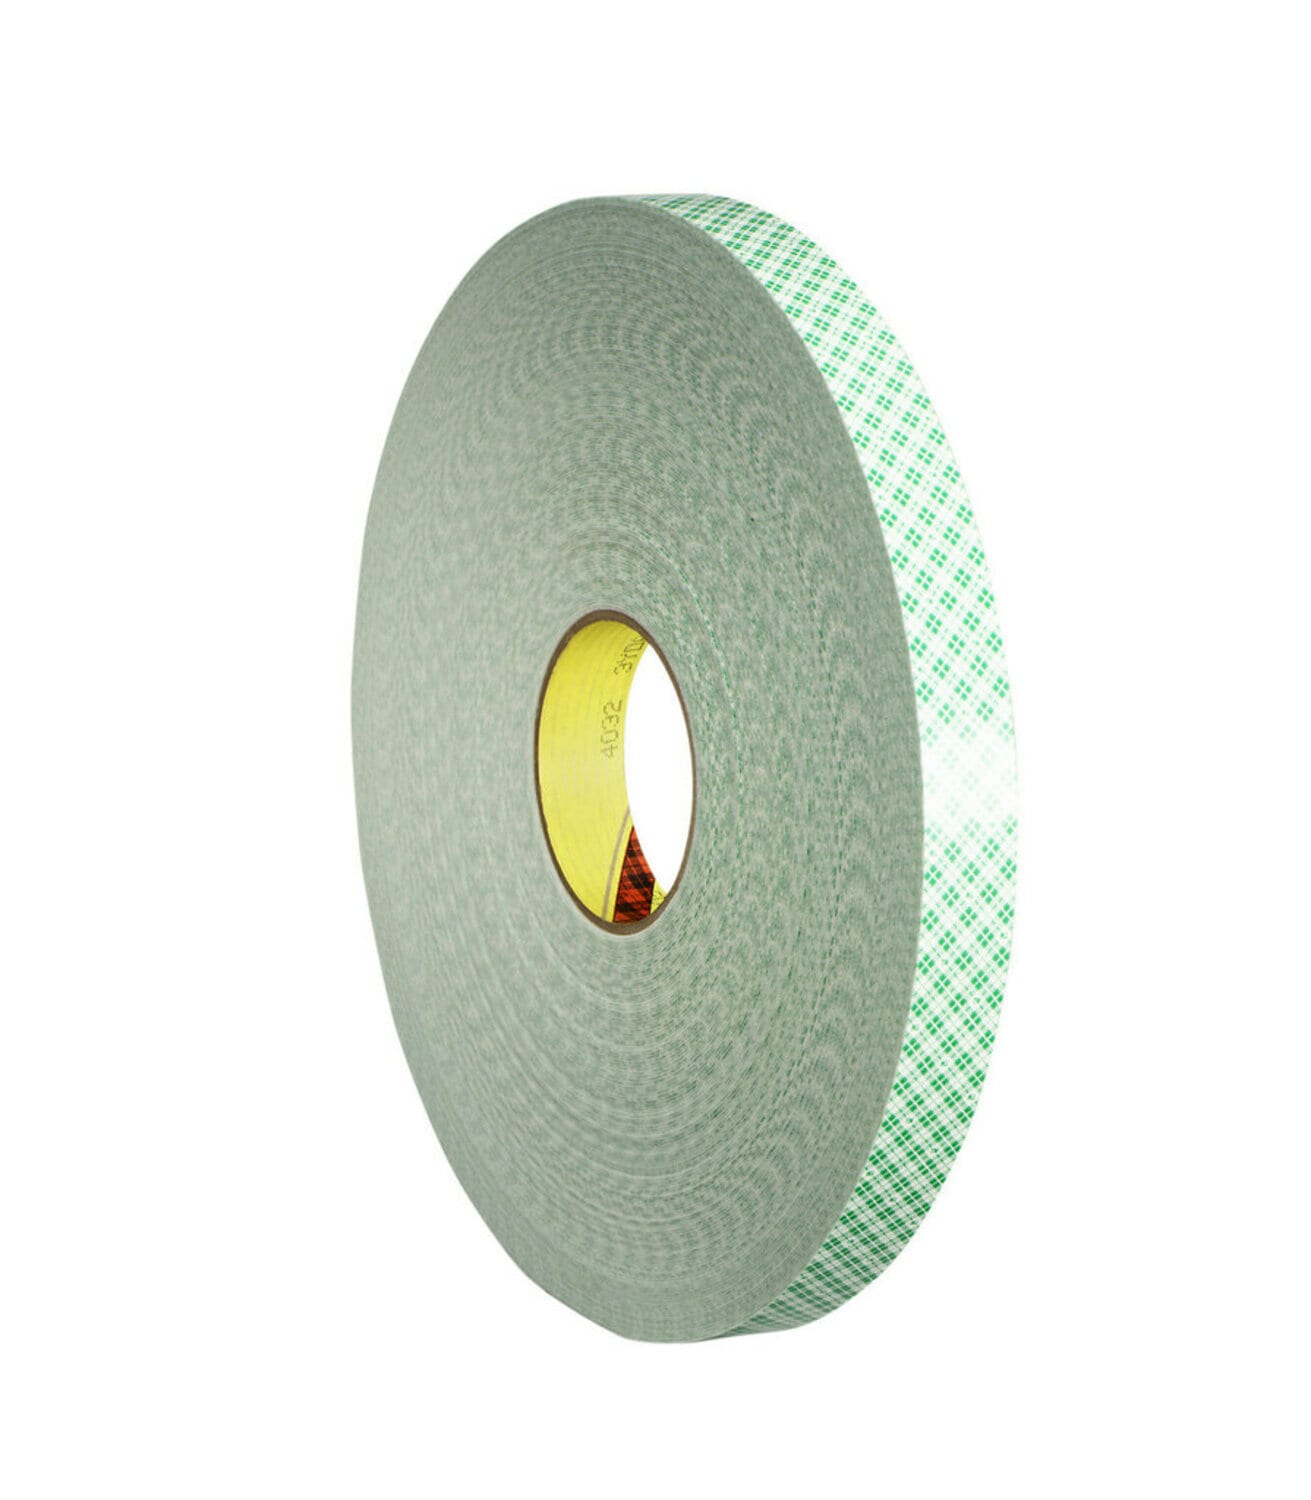 3M 4016 Double Coated Urethane Foam Tape (1/16 thick), 0.75 Wide, 5 yd.  Length, White (1 roll)